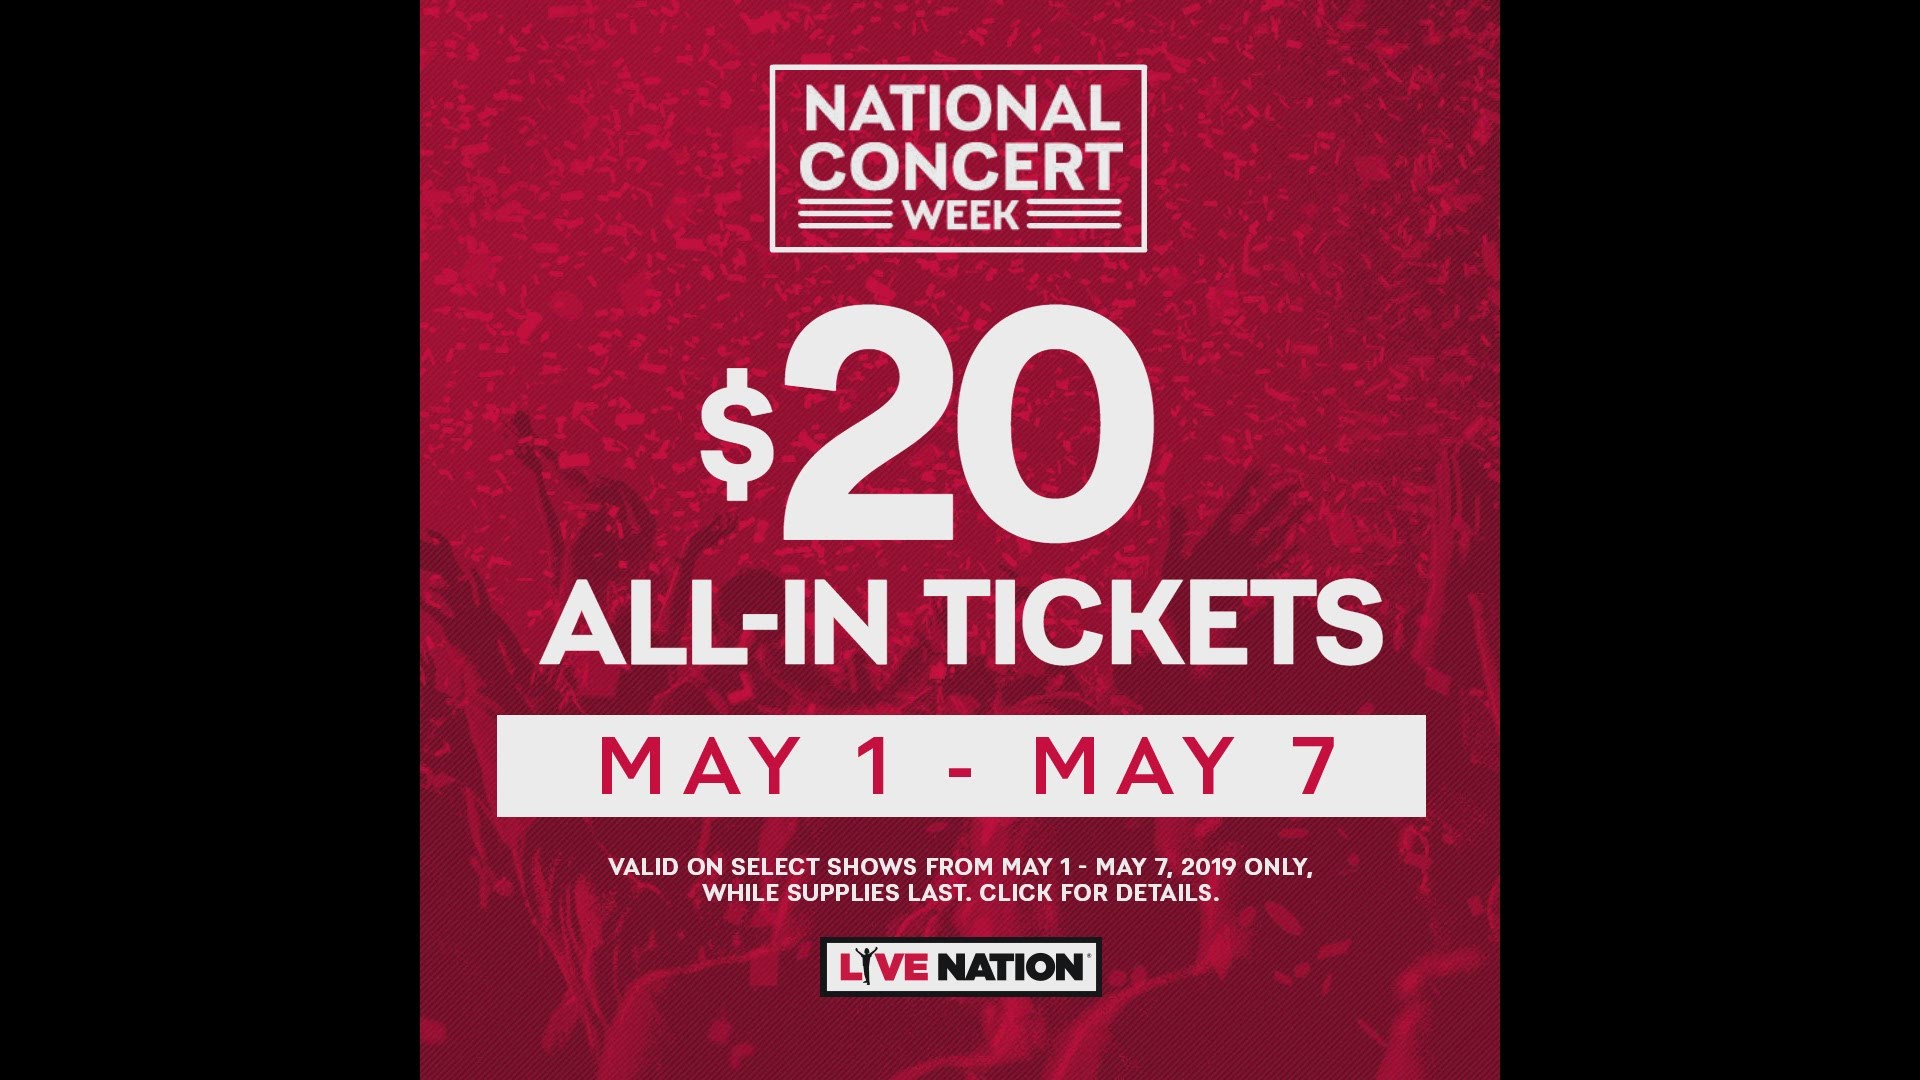 Win tickets to a Live Nation Concert of Your Choice!